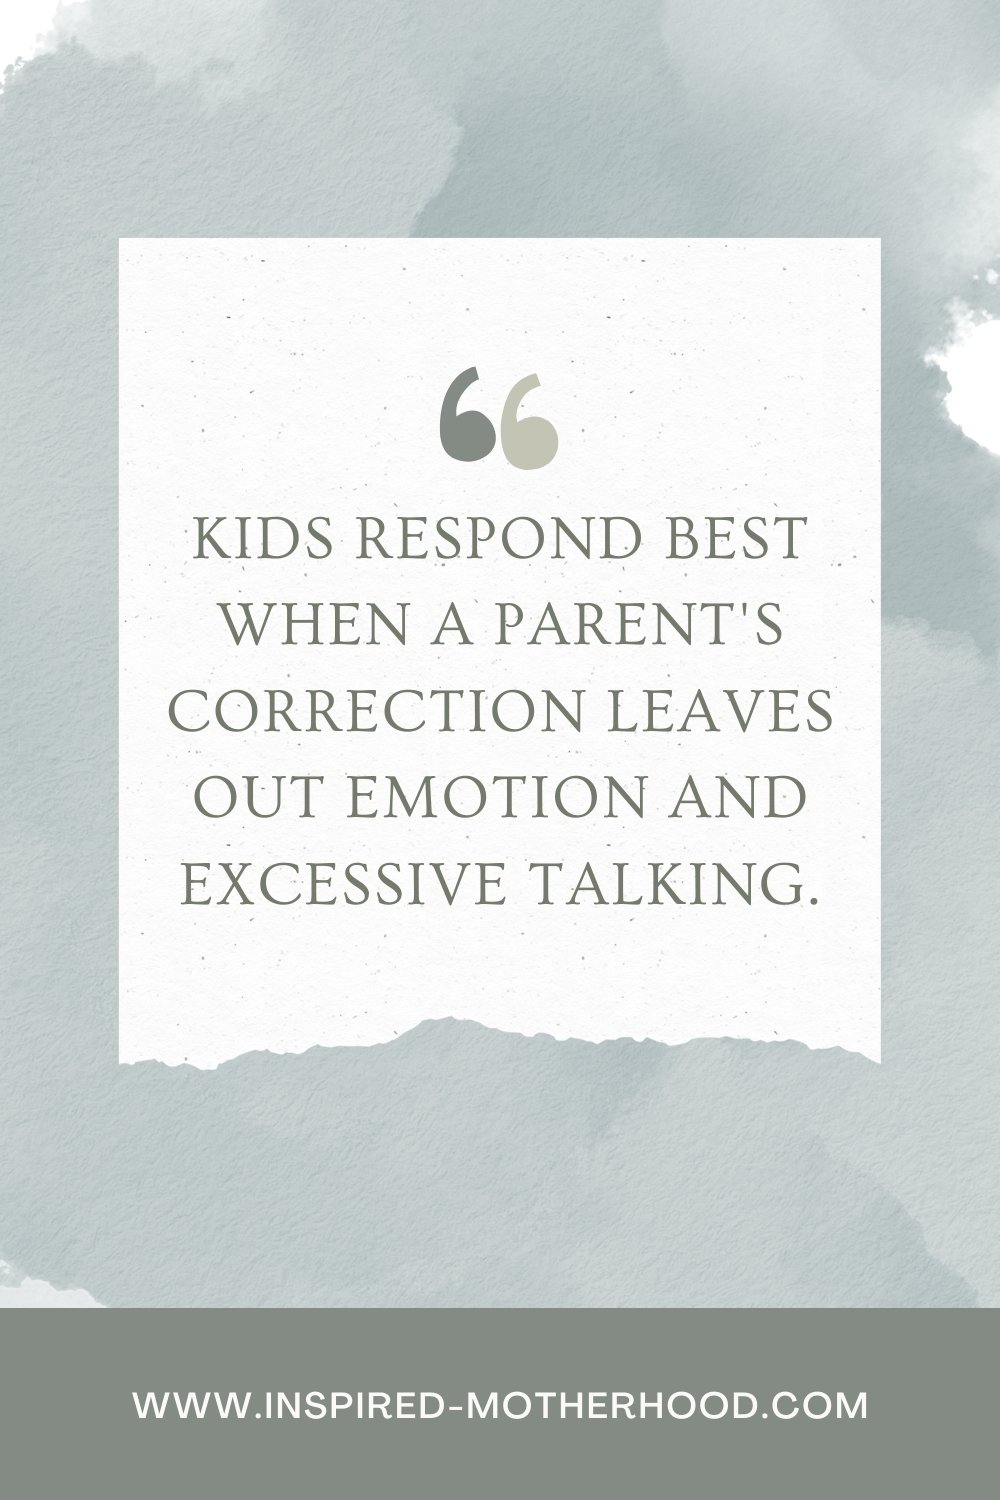 Kids respond best when a parent's correction leaves out the emotion and there isn't much excessive talking. 